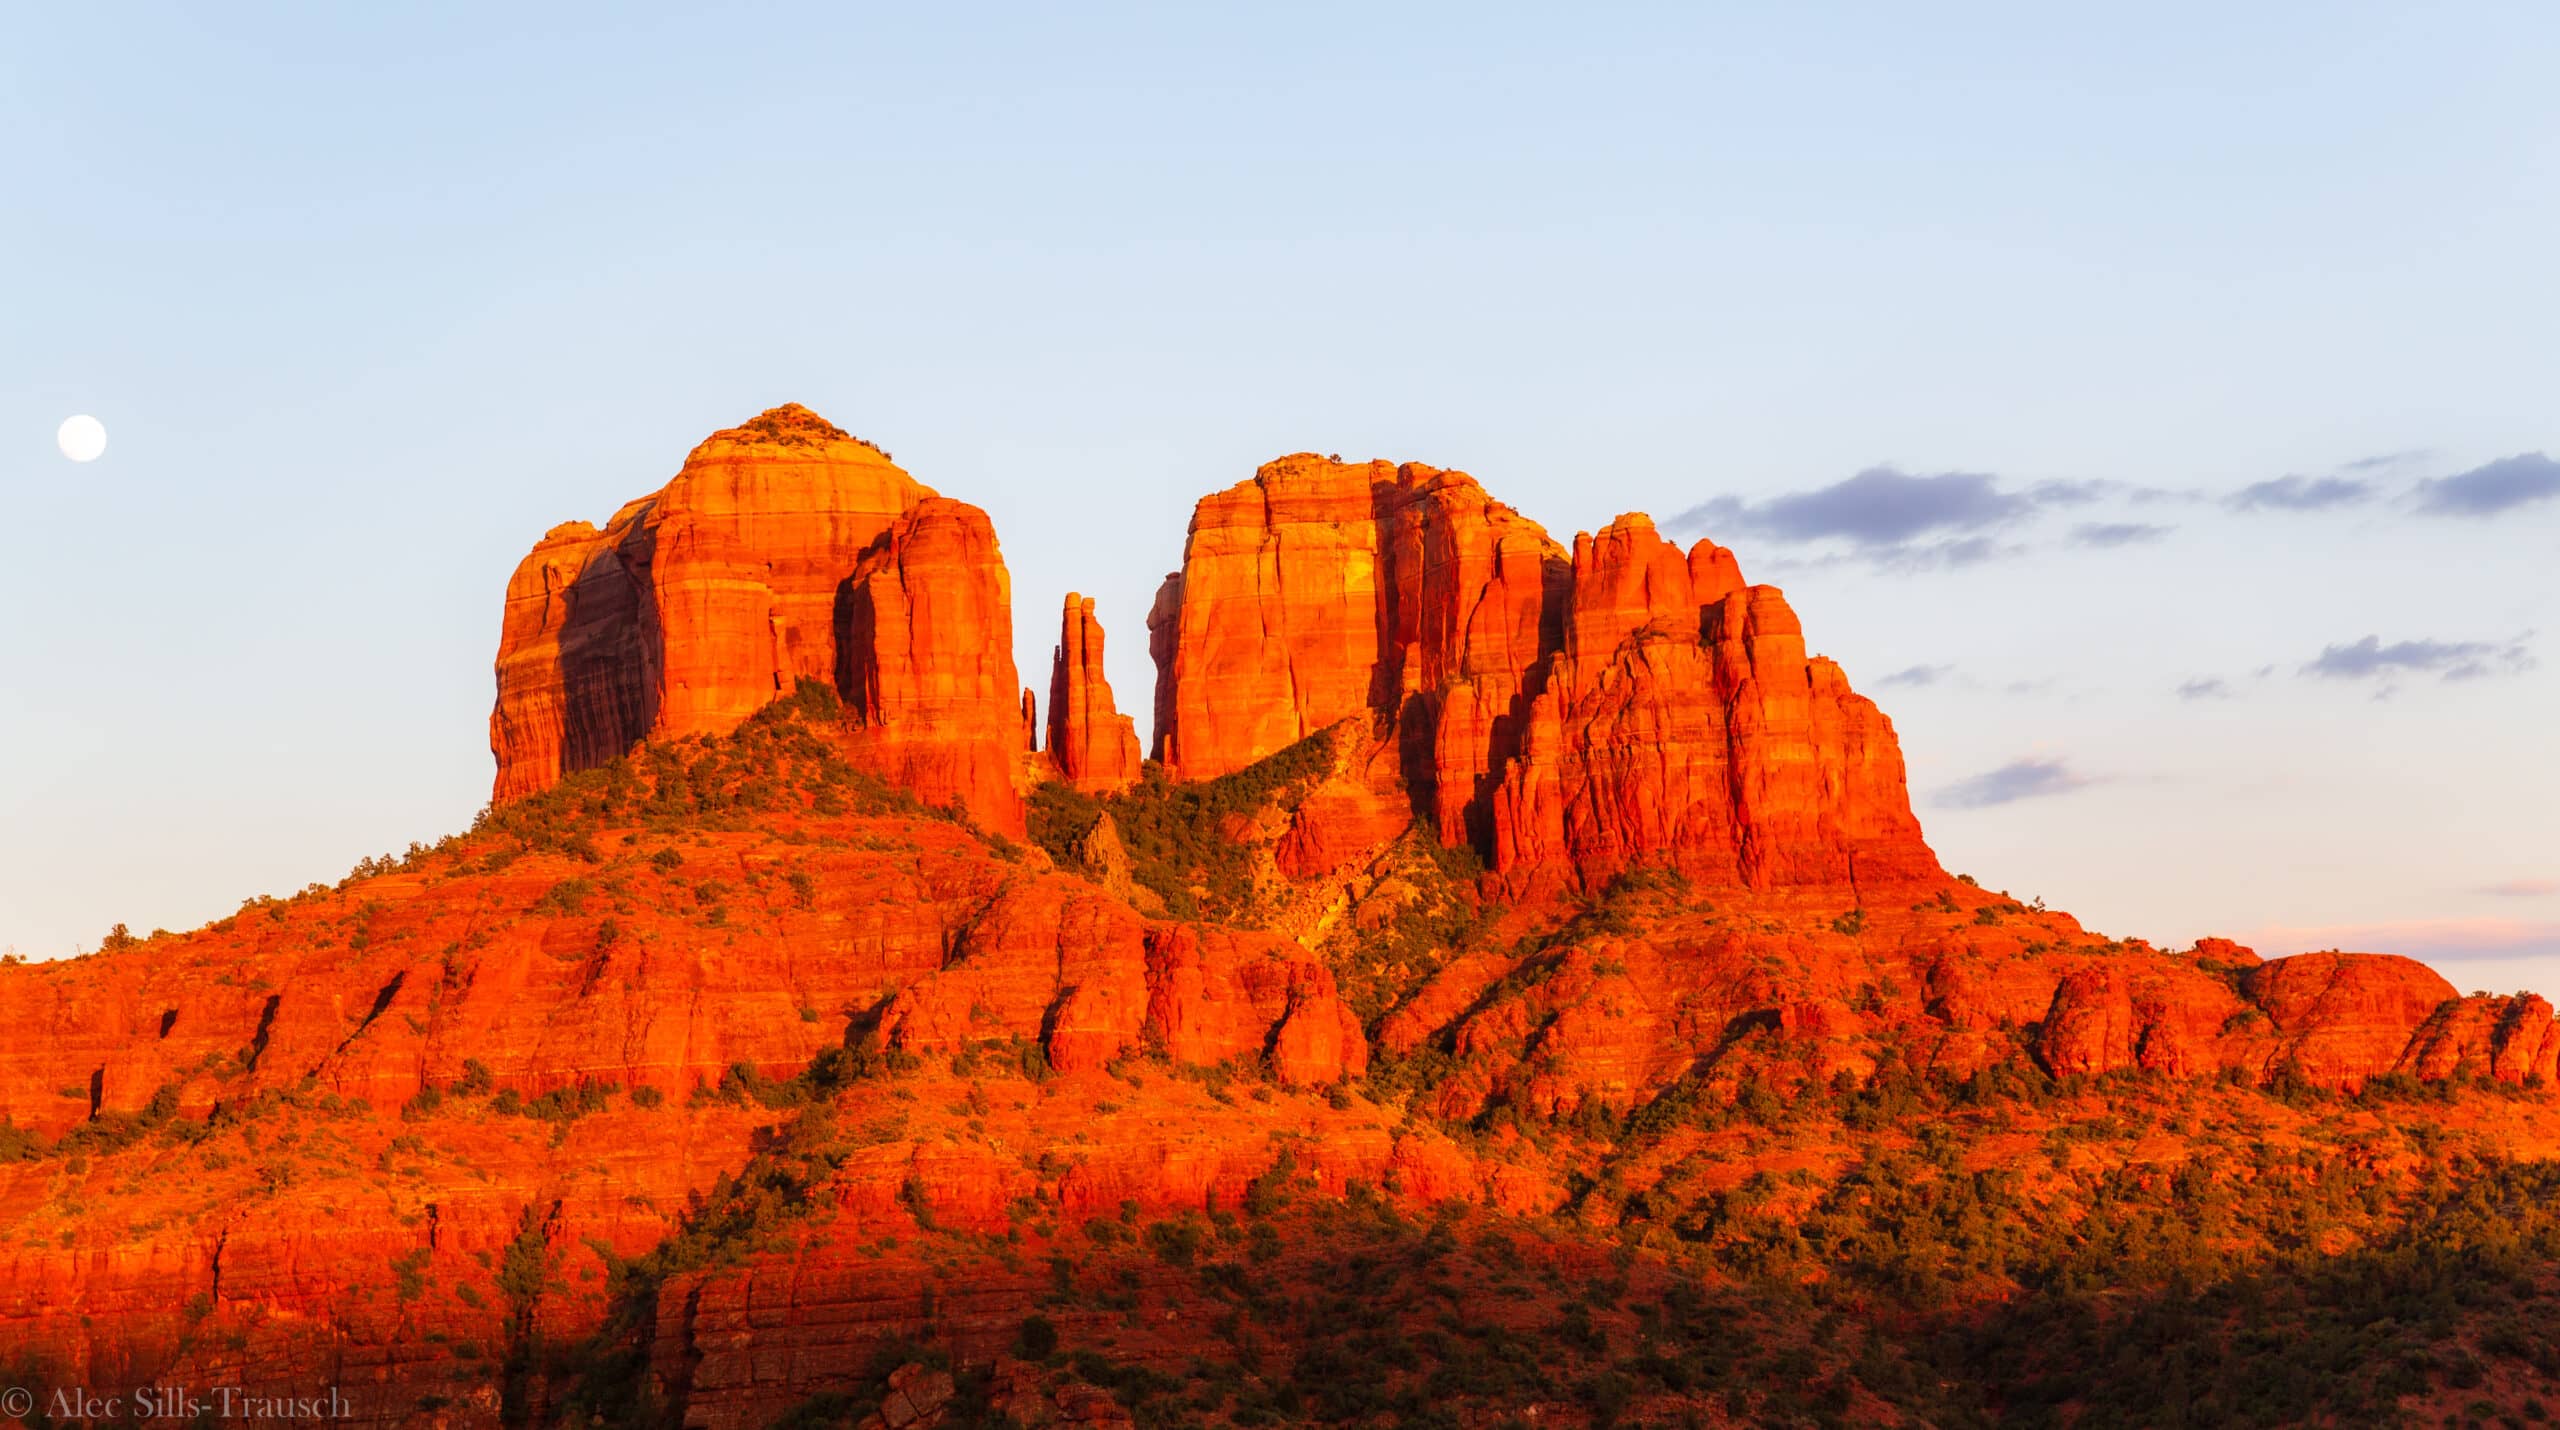 Sedona - A Spiritual Oasis Surrounded by Red Rocks